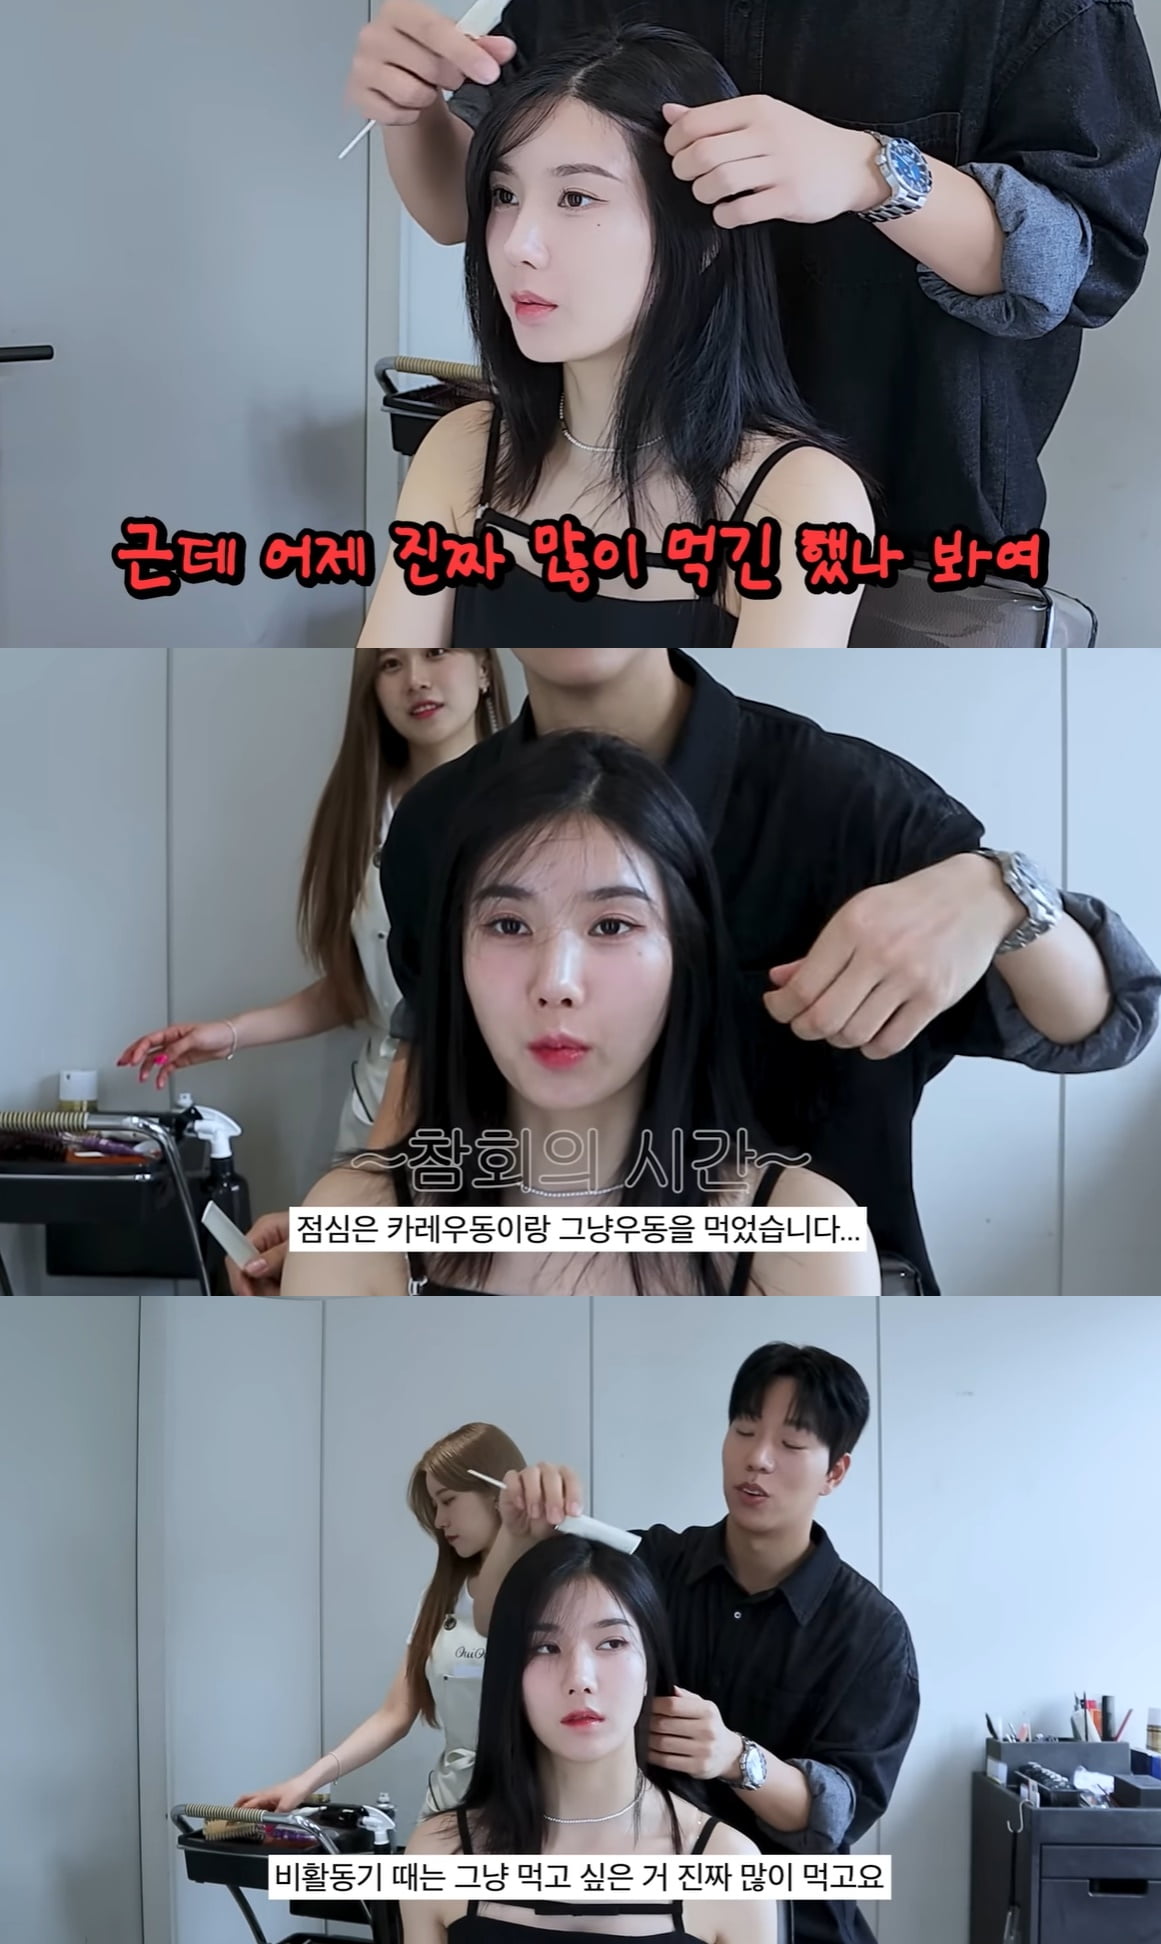 Eunbi Kwon "Recognize a lot after 'Water Bomb'"